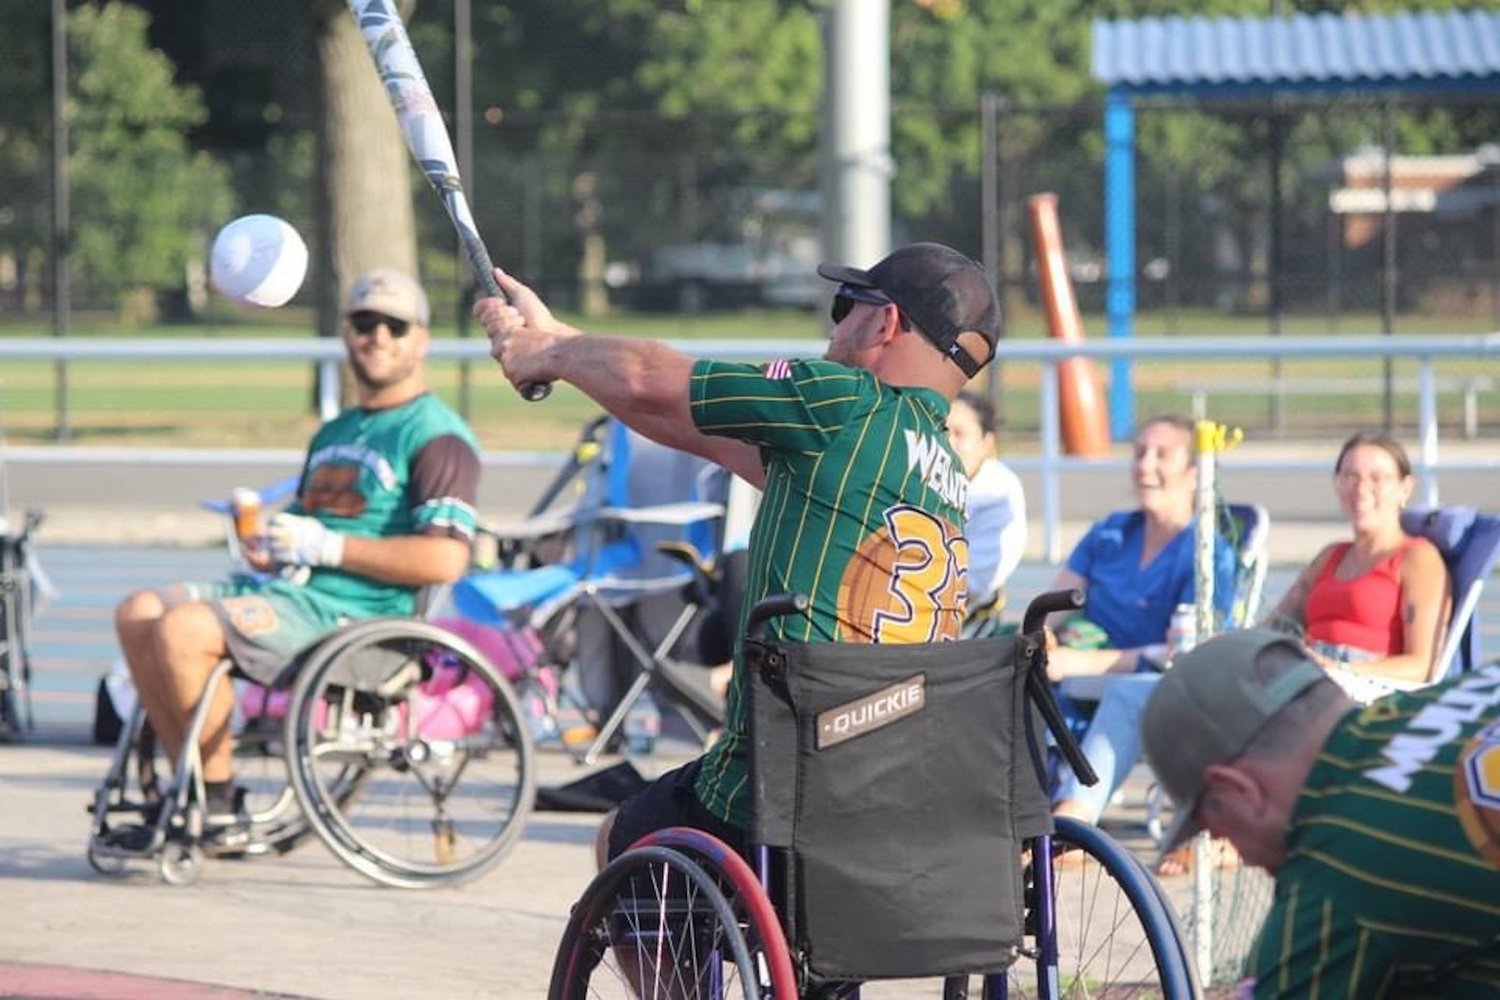 Ray Werner, of Jeremy’s Misfits, took a turn at bat during the annual game on Aug. 18.